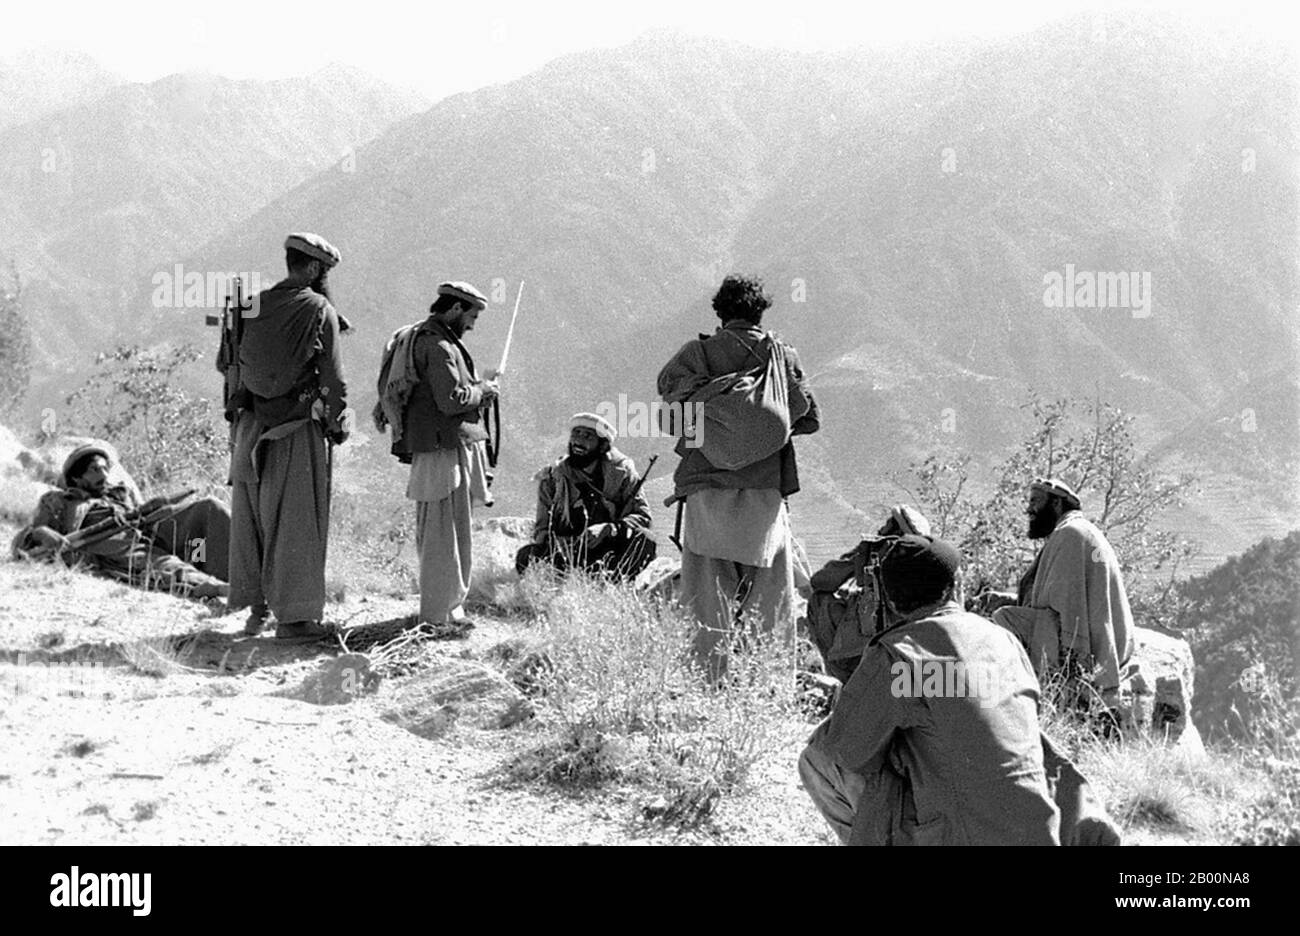 Afghanistan: A mujahideen mortar position in Kunar Province, 1987. Photo by Erwin Lux (CC BY-SA 3.0 License).  The Soviet War in Afghanistan was a nine-year conflict involving the Soviet Union, supporting the Marxist government of the Democratic Republic of Afghanistan against the indigenous Afghan Mujahideen and foreign ‘Arab–Afghan’ volunteers. The mujahideen found other support from a variety of sources including the United States, Saudi Arabia, the United Kingdom, Pakistan, Egypt, China and other nations. The Afghan war became a proxy war in the broader context of the late Cold War. Stock Photo